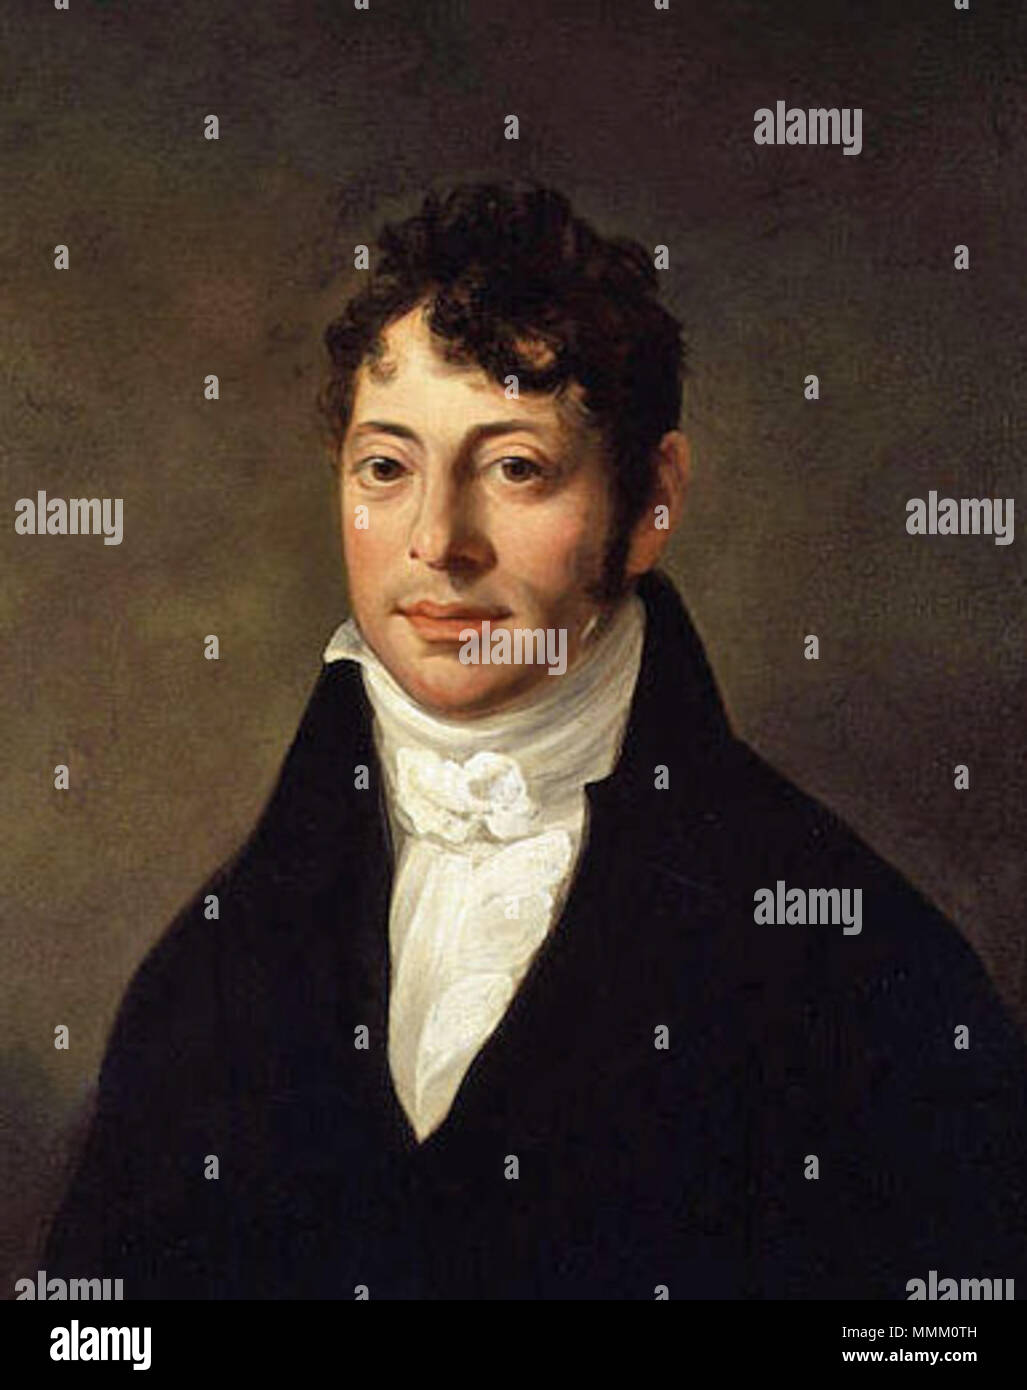 . English: Cropped version of Commons image File:Joseph Grimaldi by John Cawse.jpg removing some of the extensive dark background area. Details otherwise unchanged.  . This file is lacking author information. Grimaldi by John Cawse Stock Photo